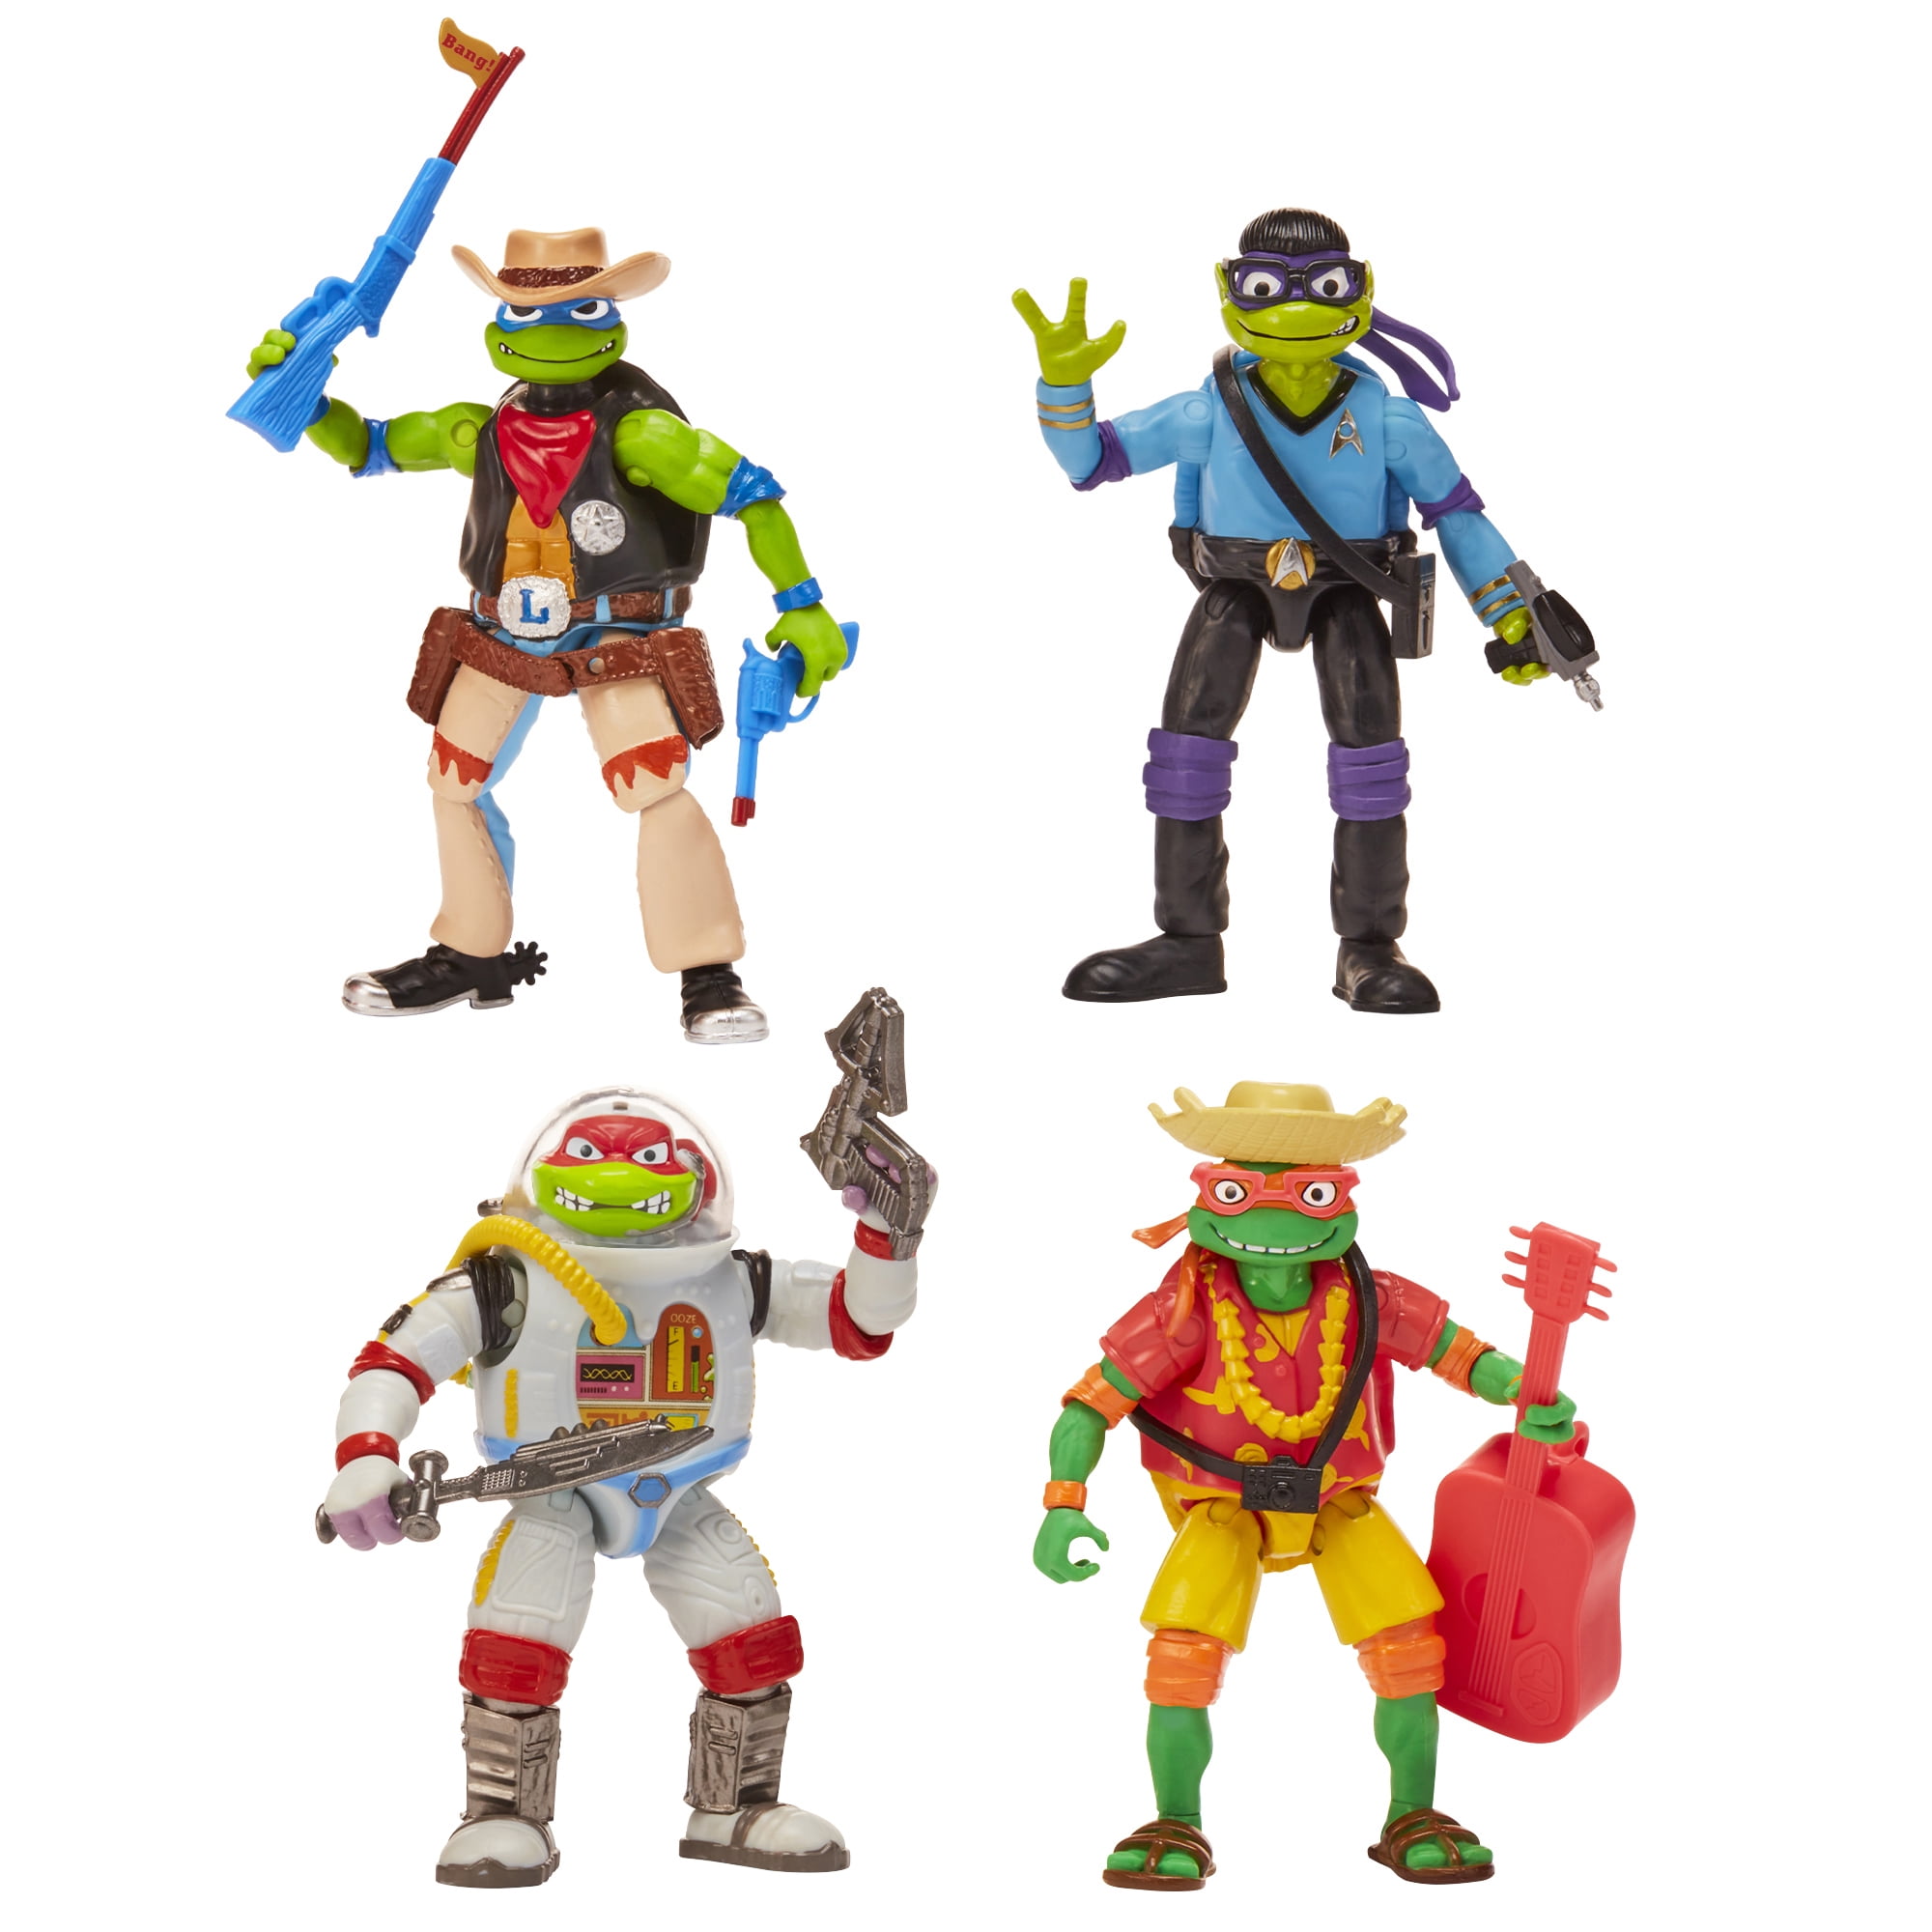 Ultimate Guide To TMNT Mutant Mayhem Toys